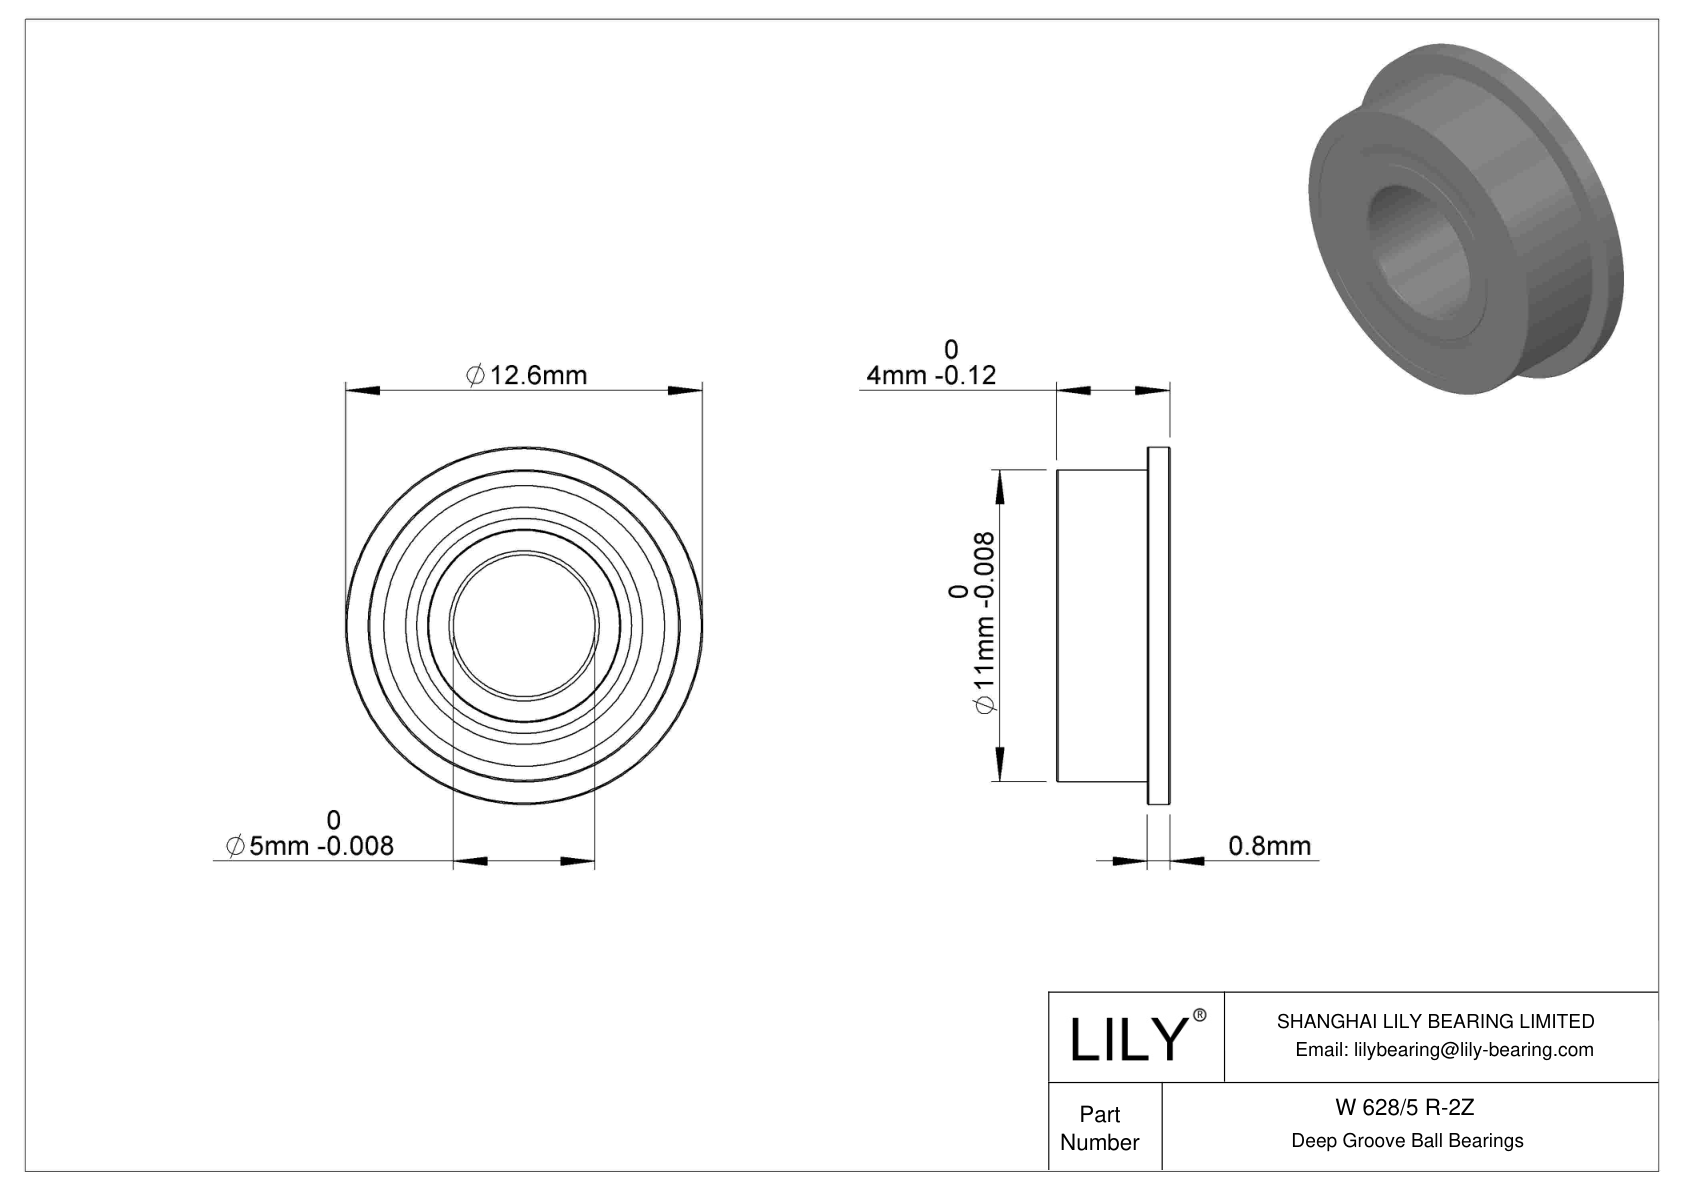 W 628/5 R-2Z Flanged Ball Bearings cad drawing